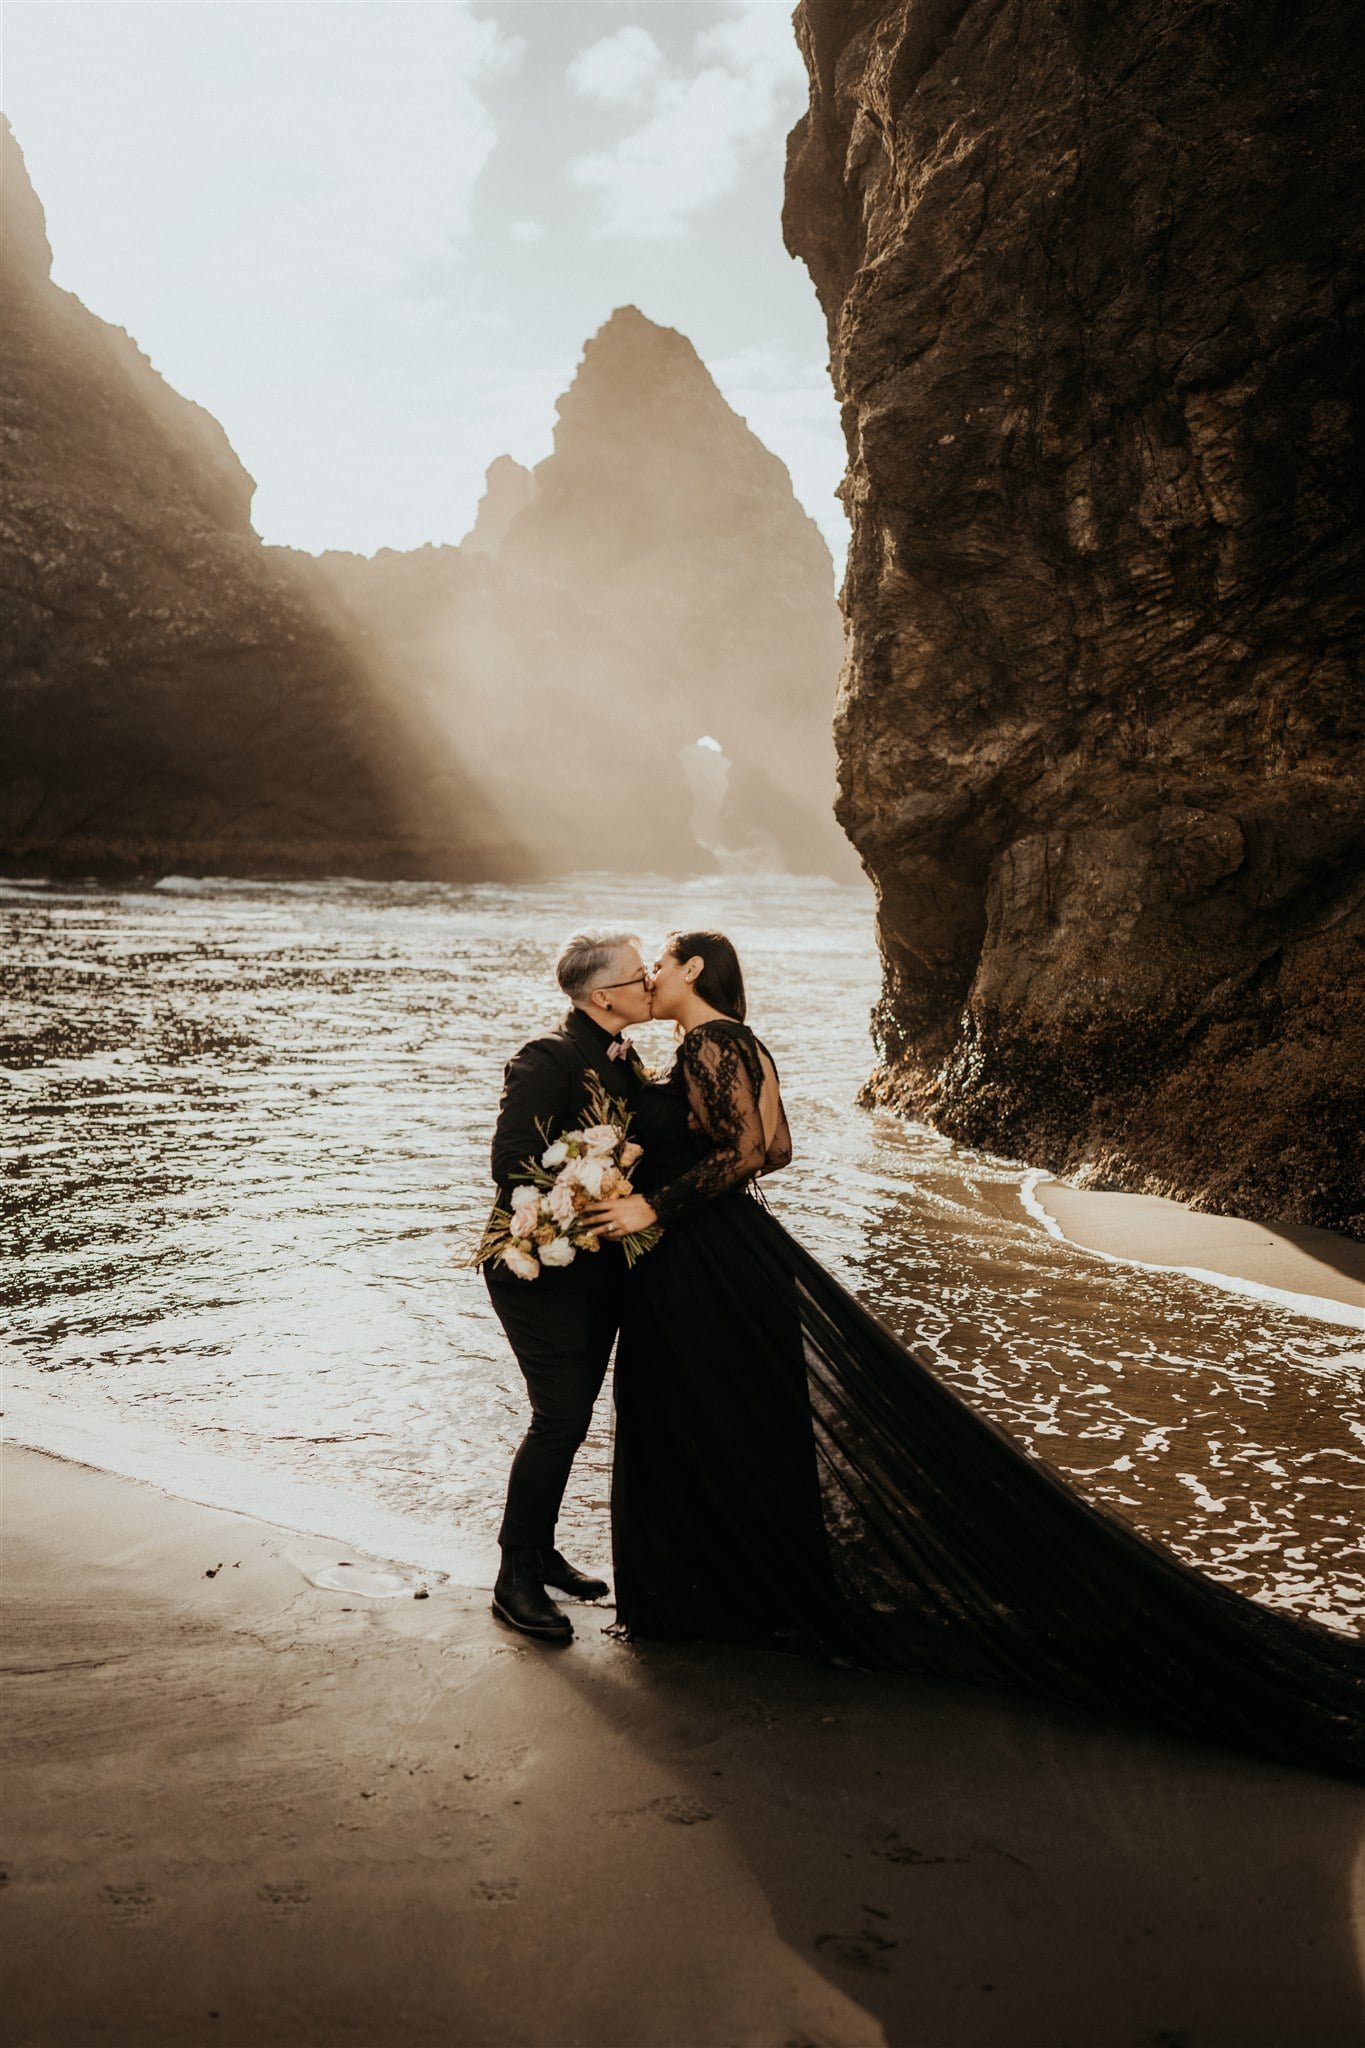 Brides kiss on the beach while wearing all black wedding outfits